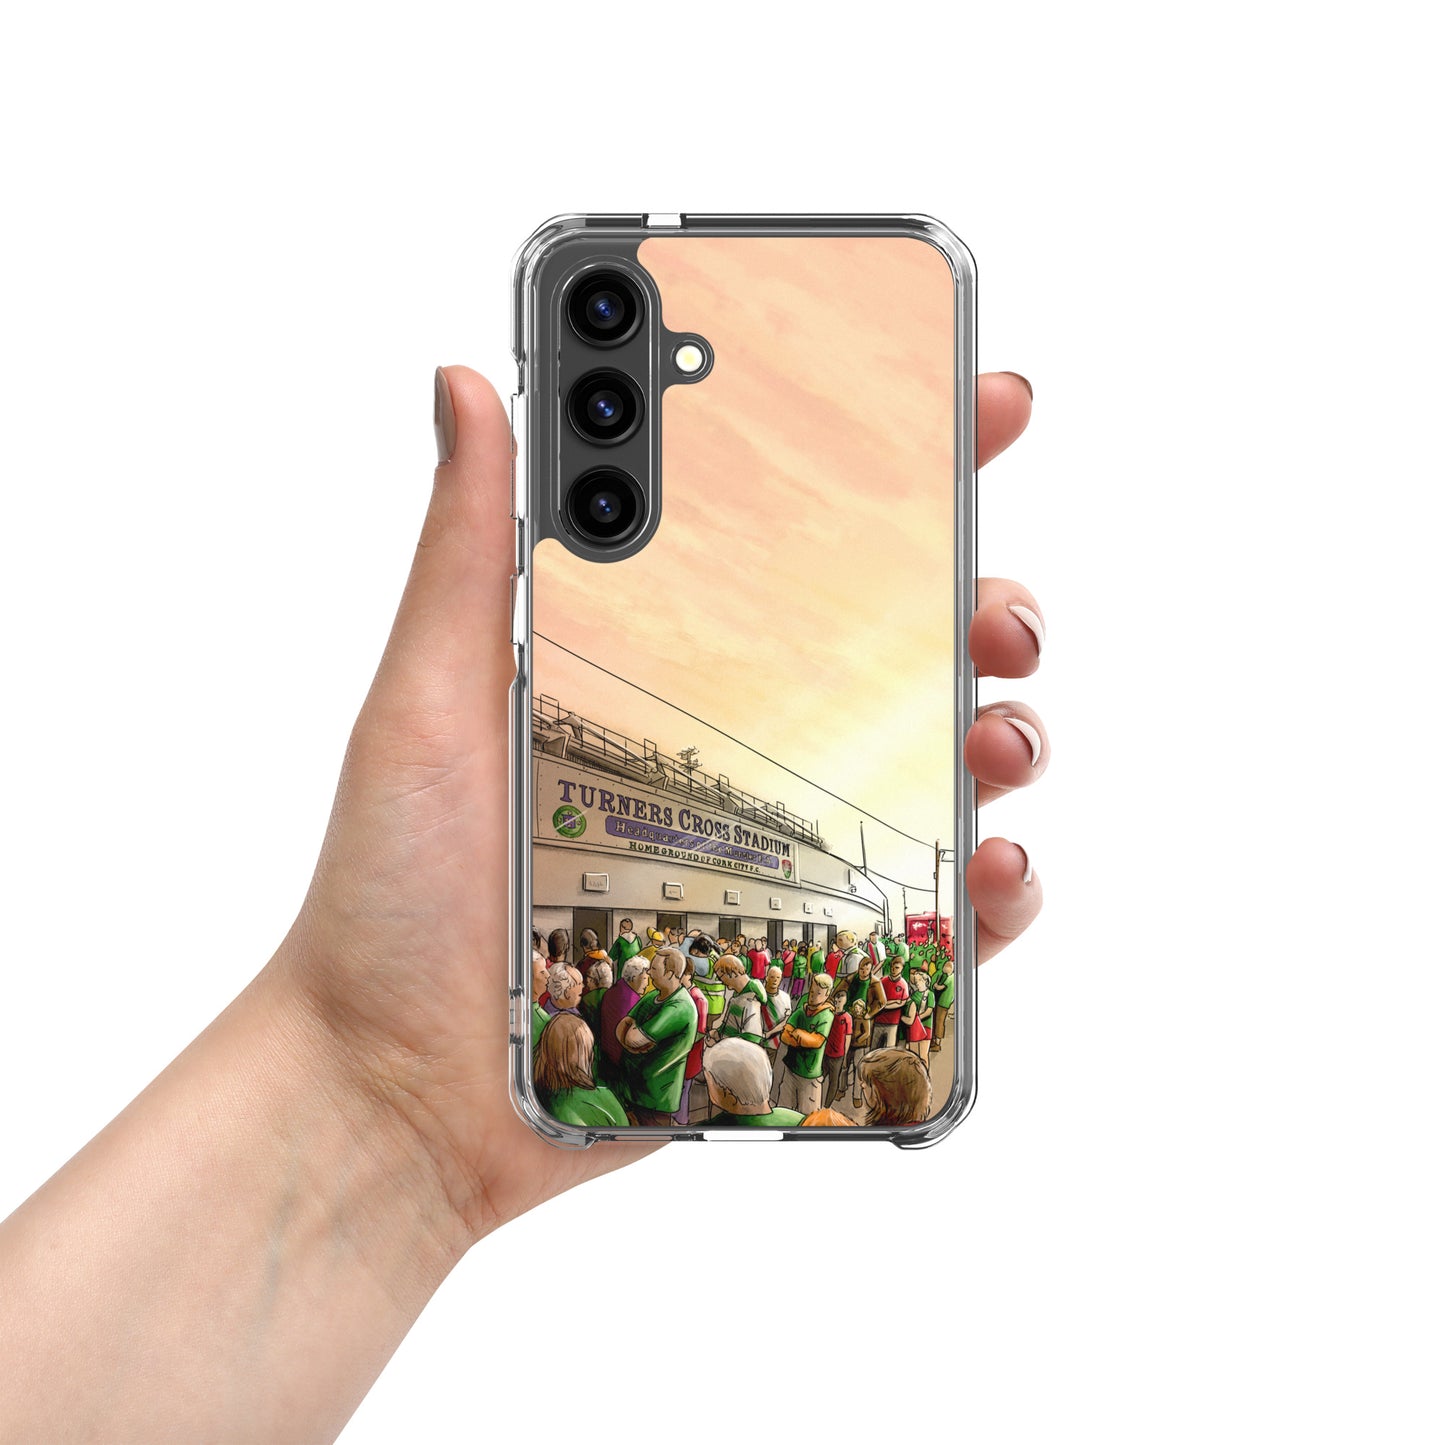 Turners Cross - Cork City FC Special Edition Samsung Case